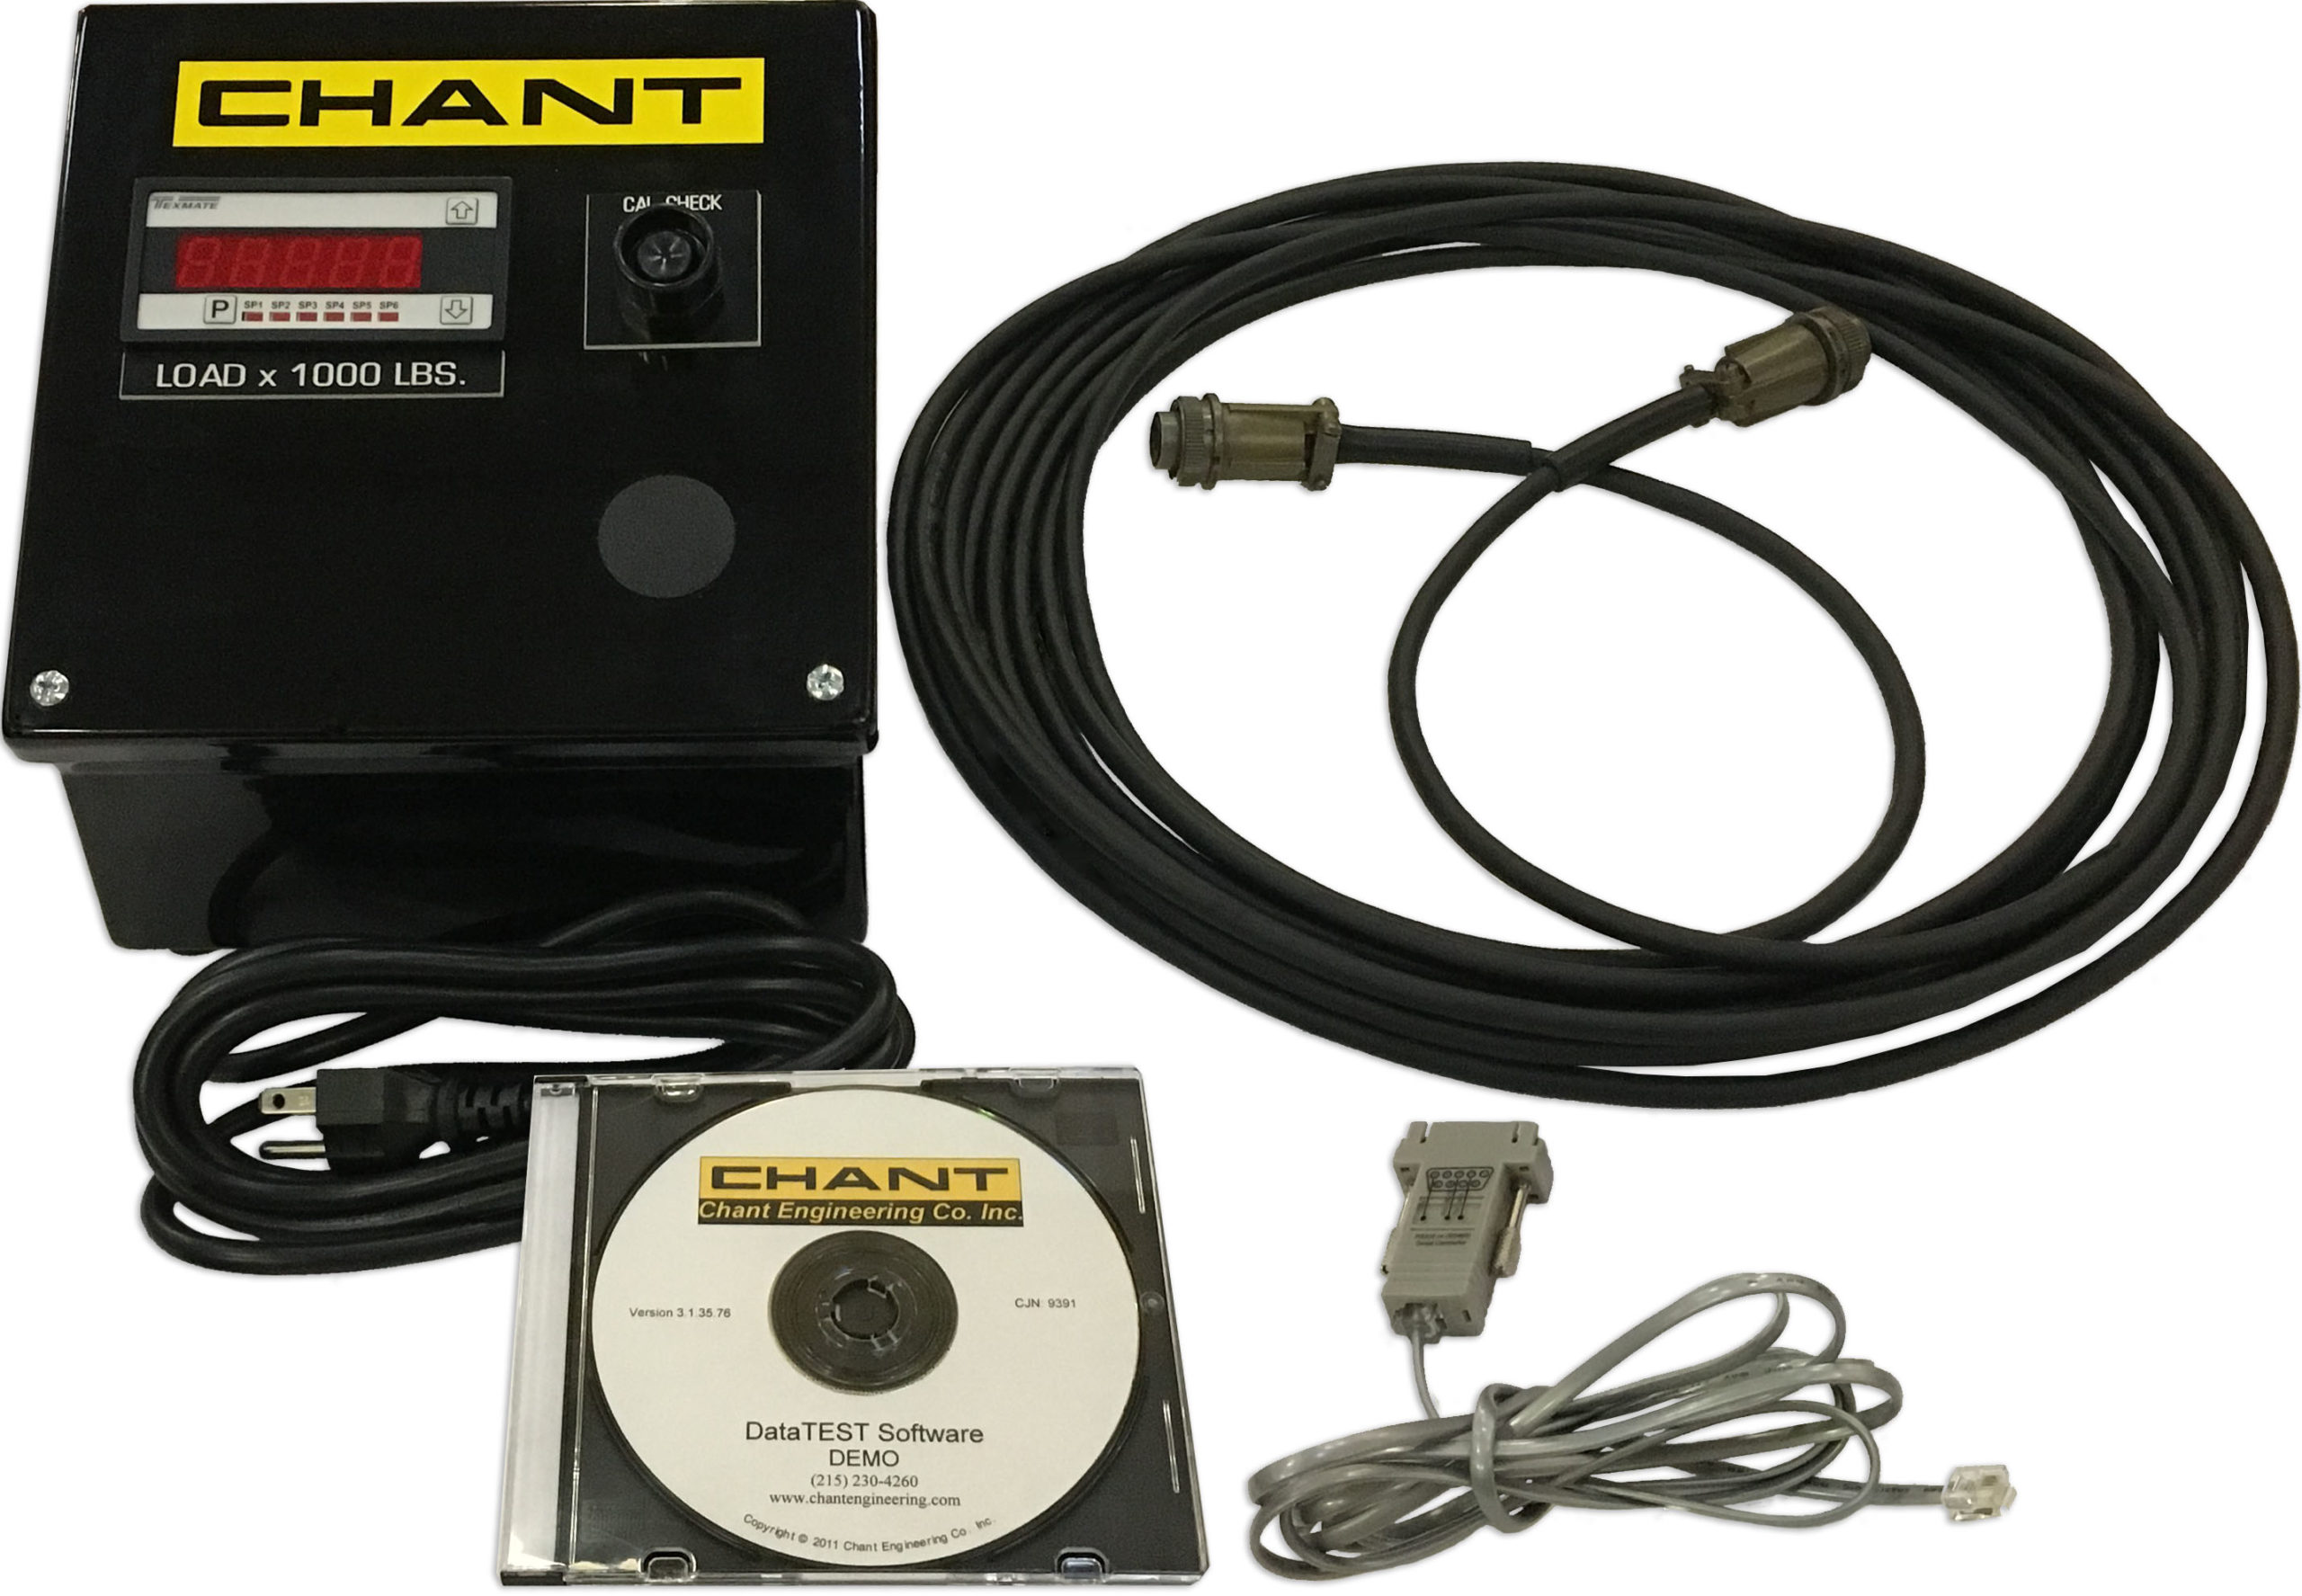 Texmate Meter, Cable and Sofware Package